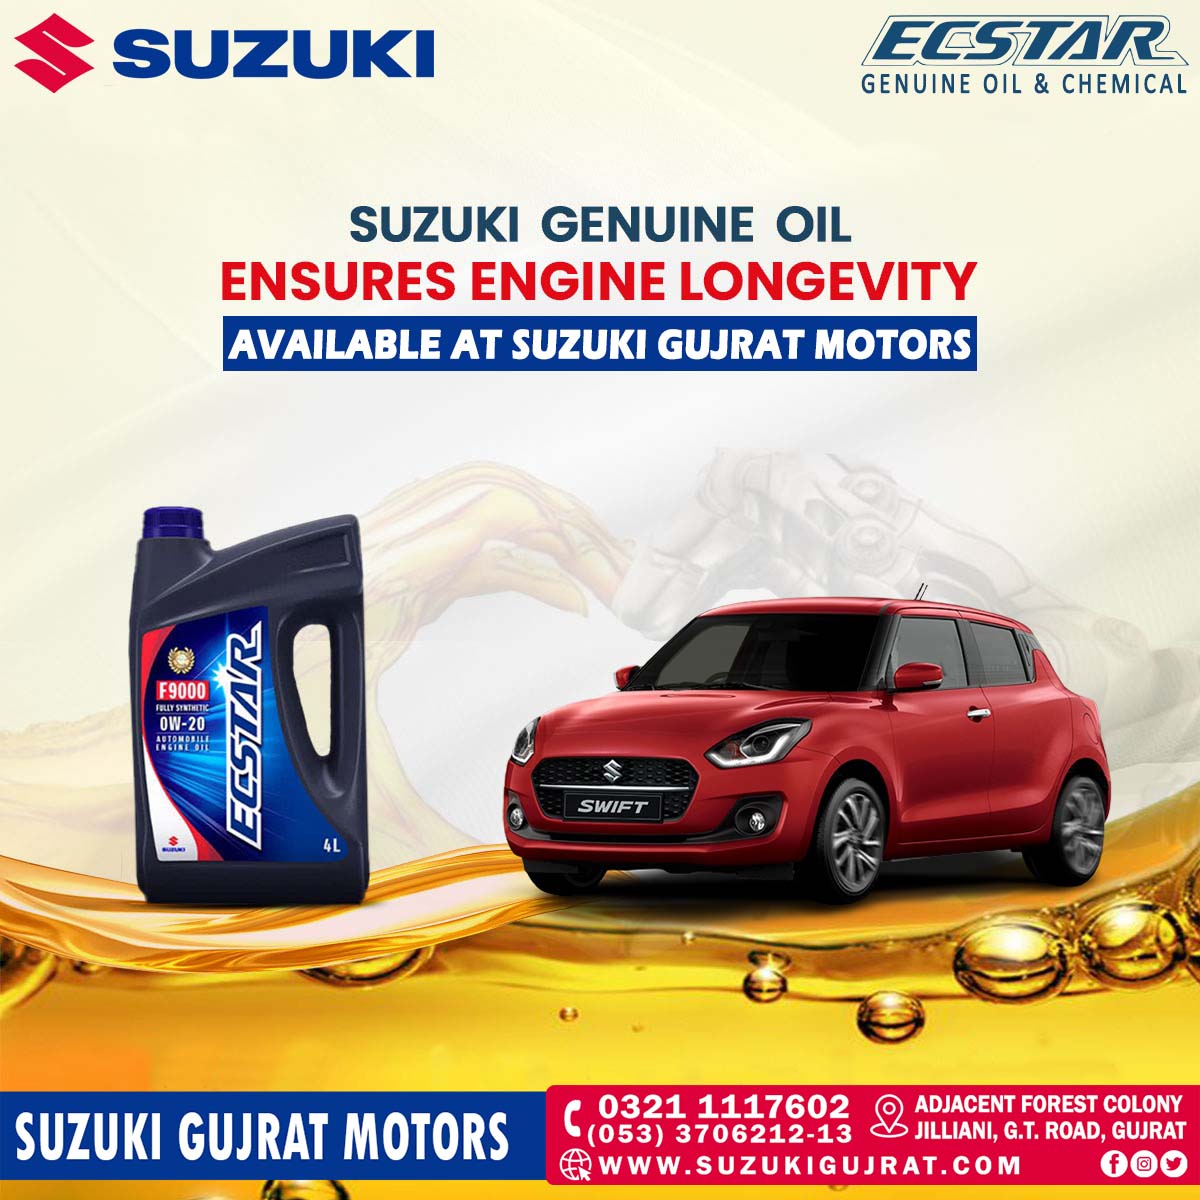 Protect your car's engine like never before with Suzuki Genuine Oil, your ultimate assurance of longevity. Exclusively available at Suzuki Gujrat Motors...

#Suzuki #Ecstar #GenuineOil #EngineOil #SuzukiGujratMotors #SuzukiPakistan